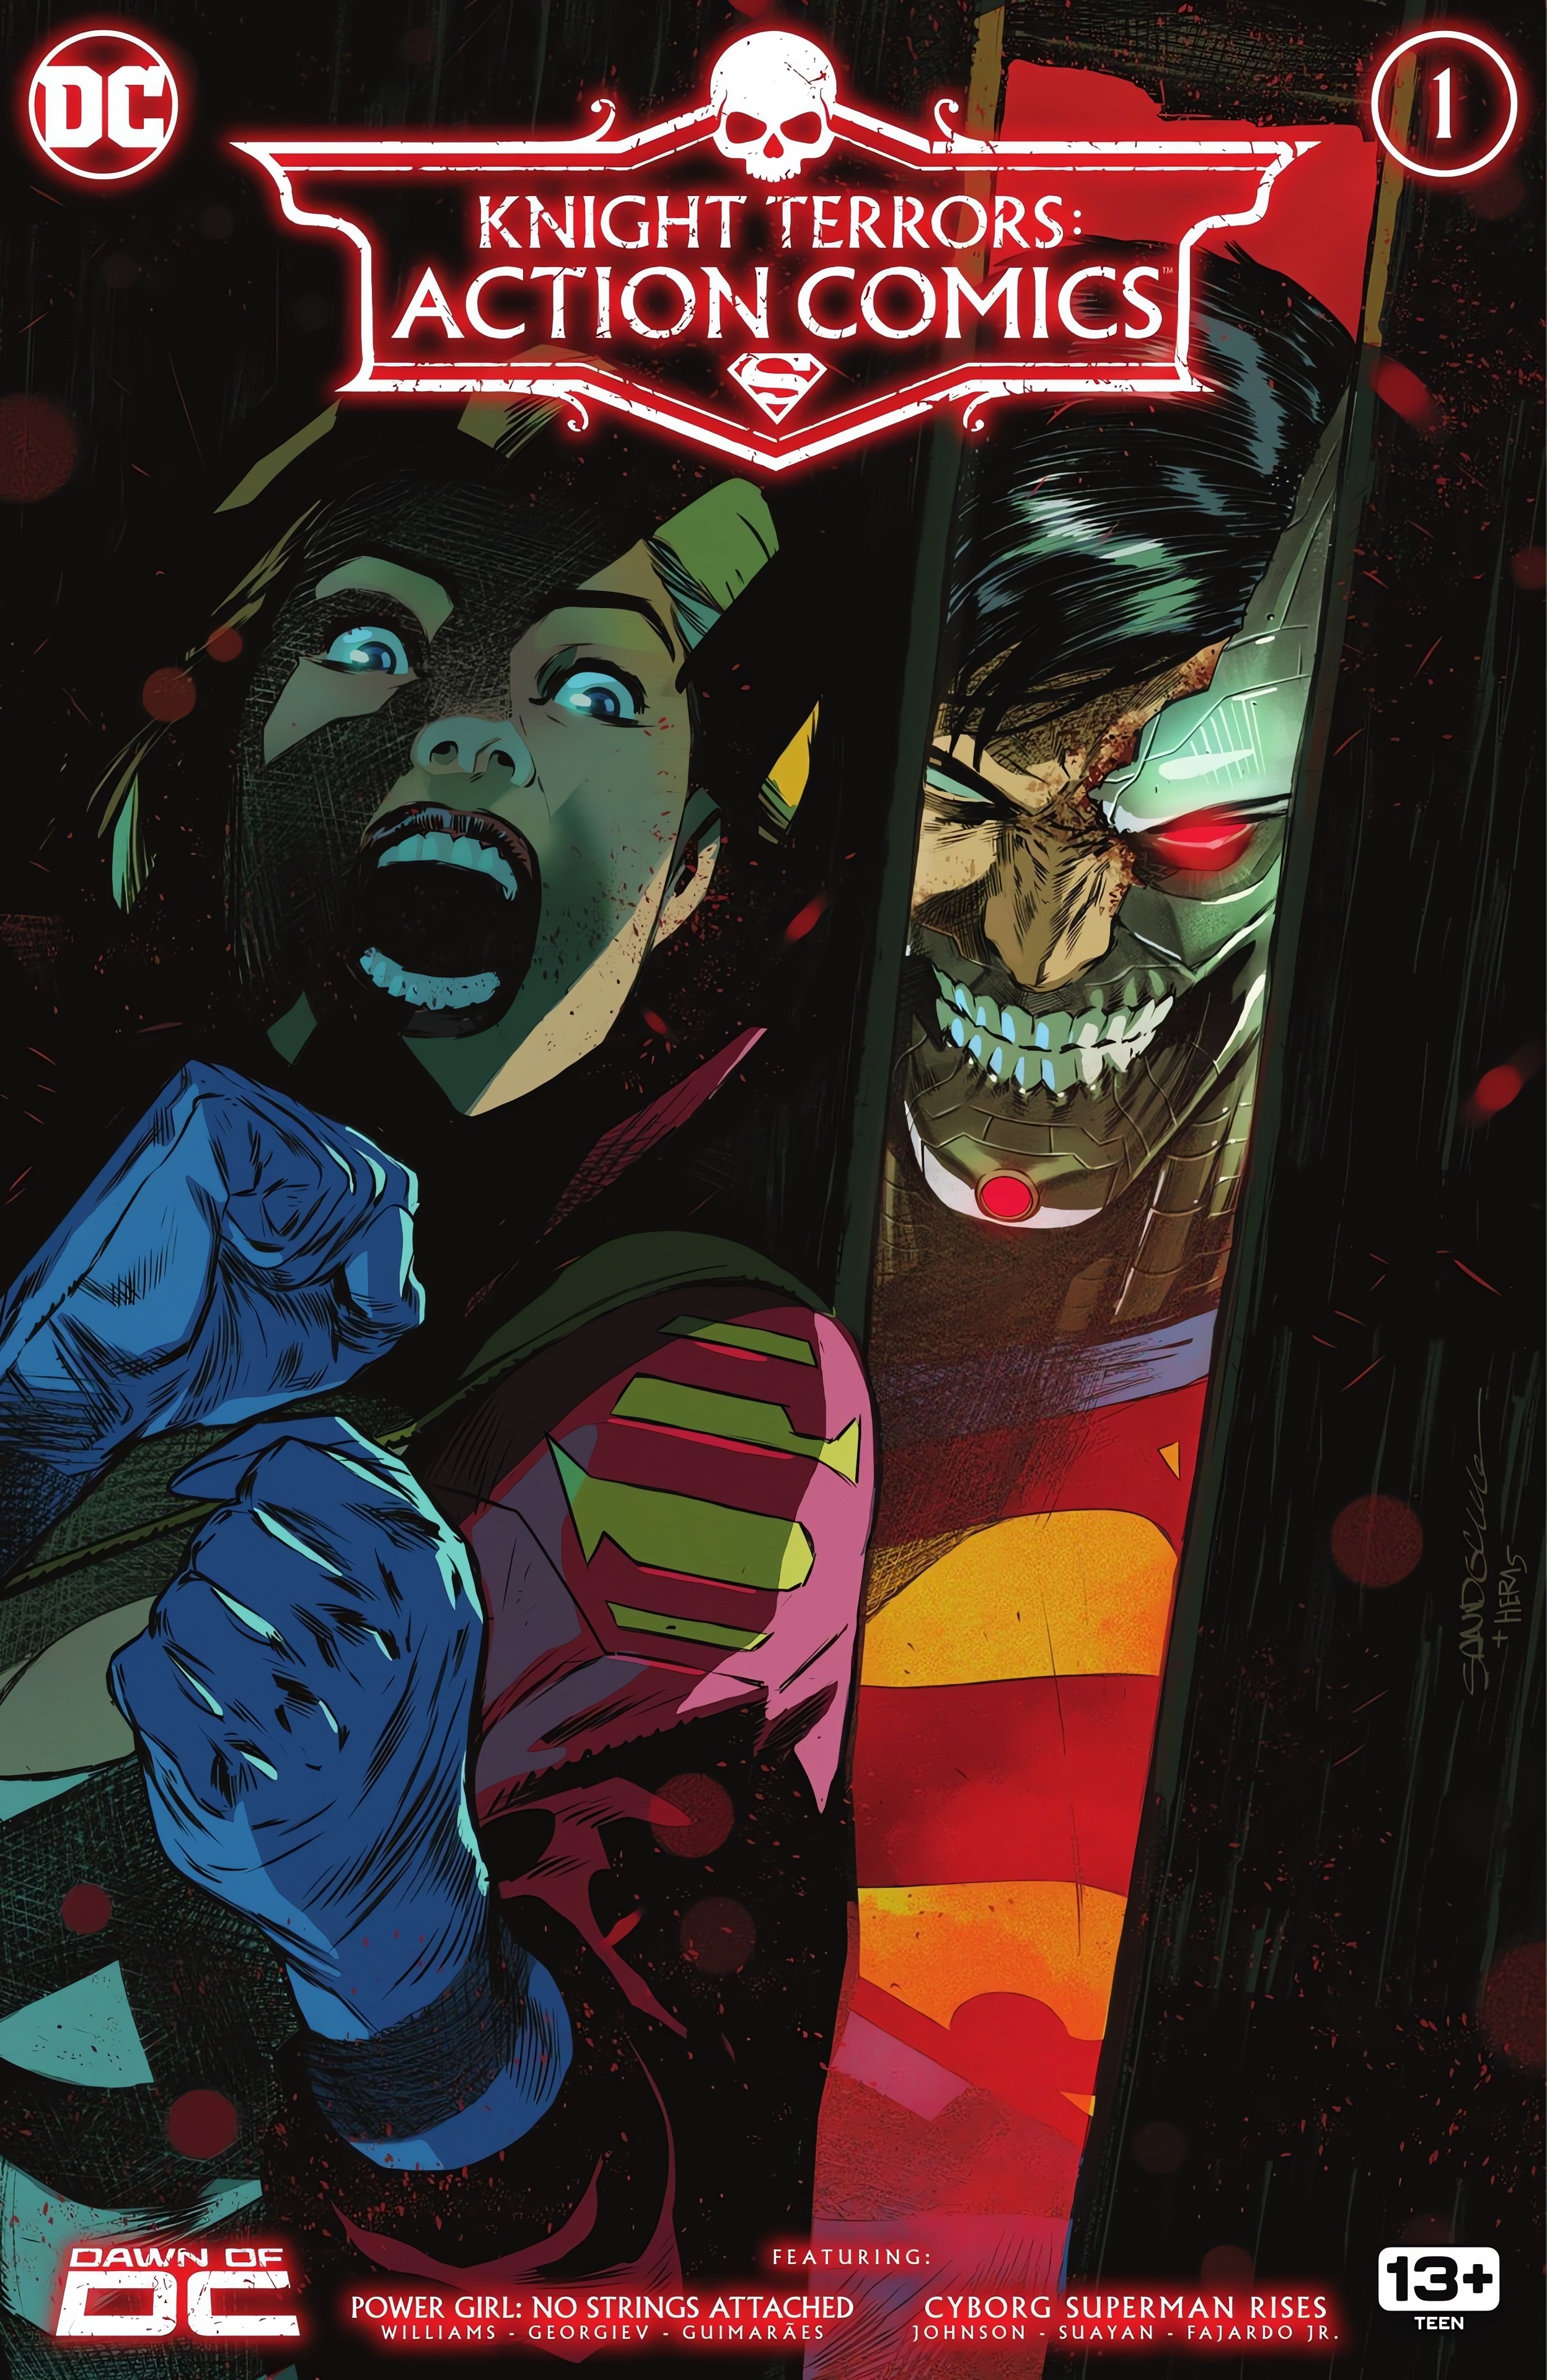 Read online Knight Terrors Collection comic -  Issue # Action Comics - 1